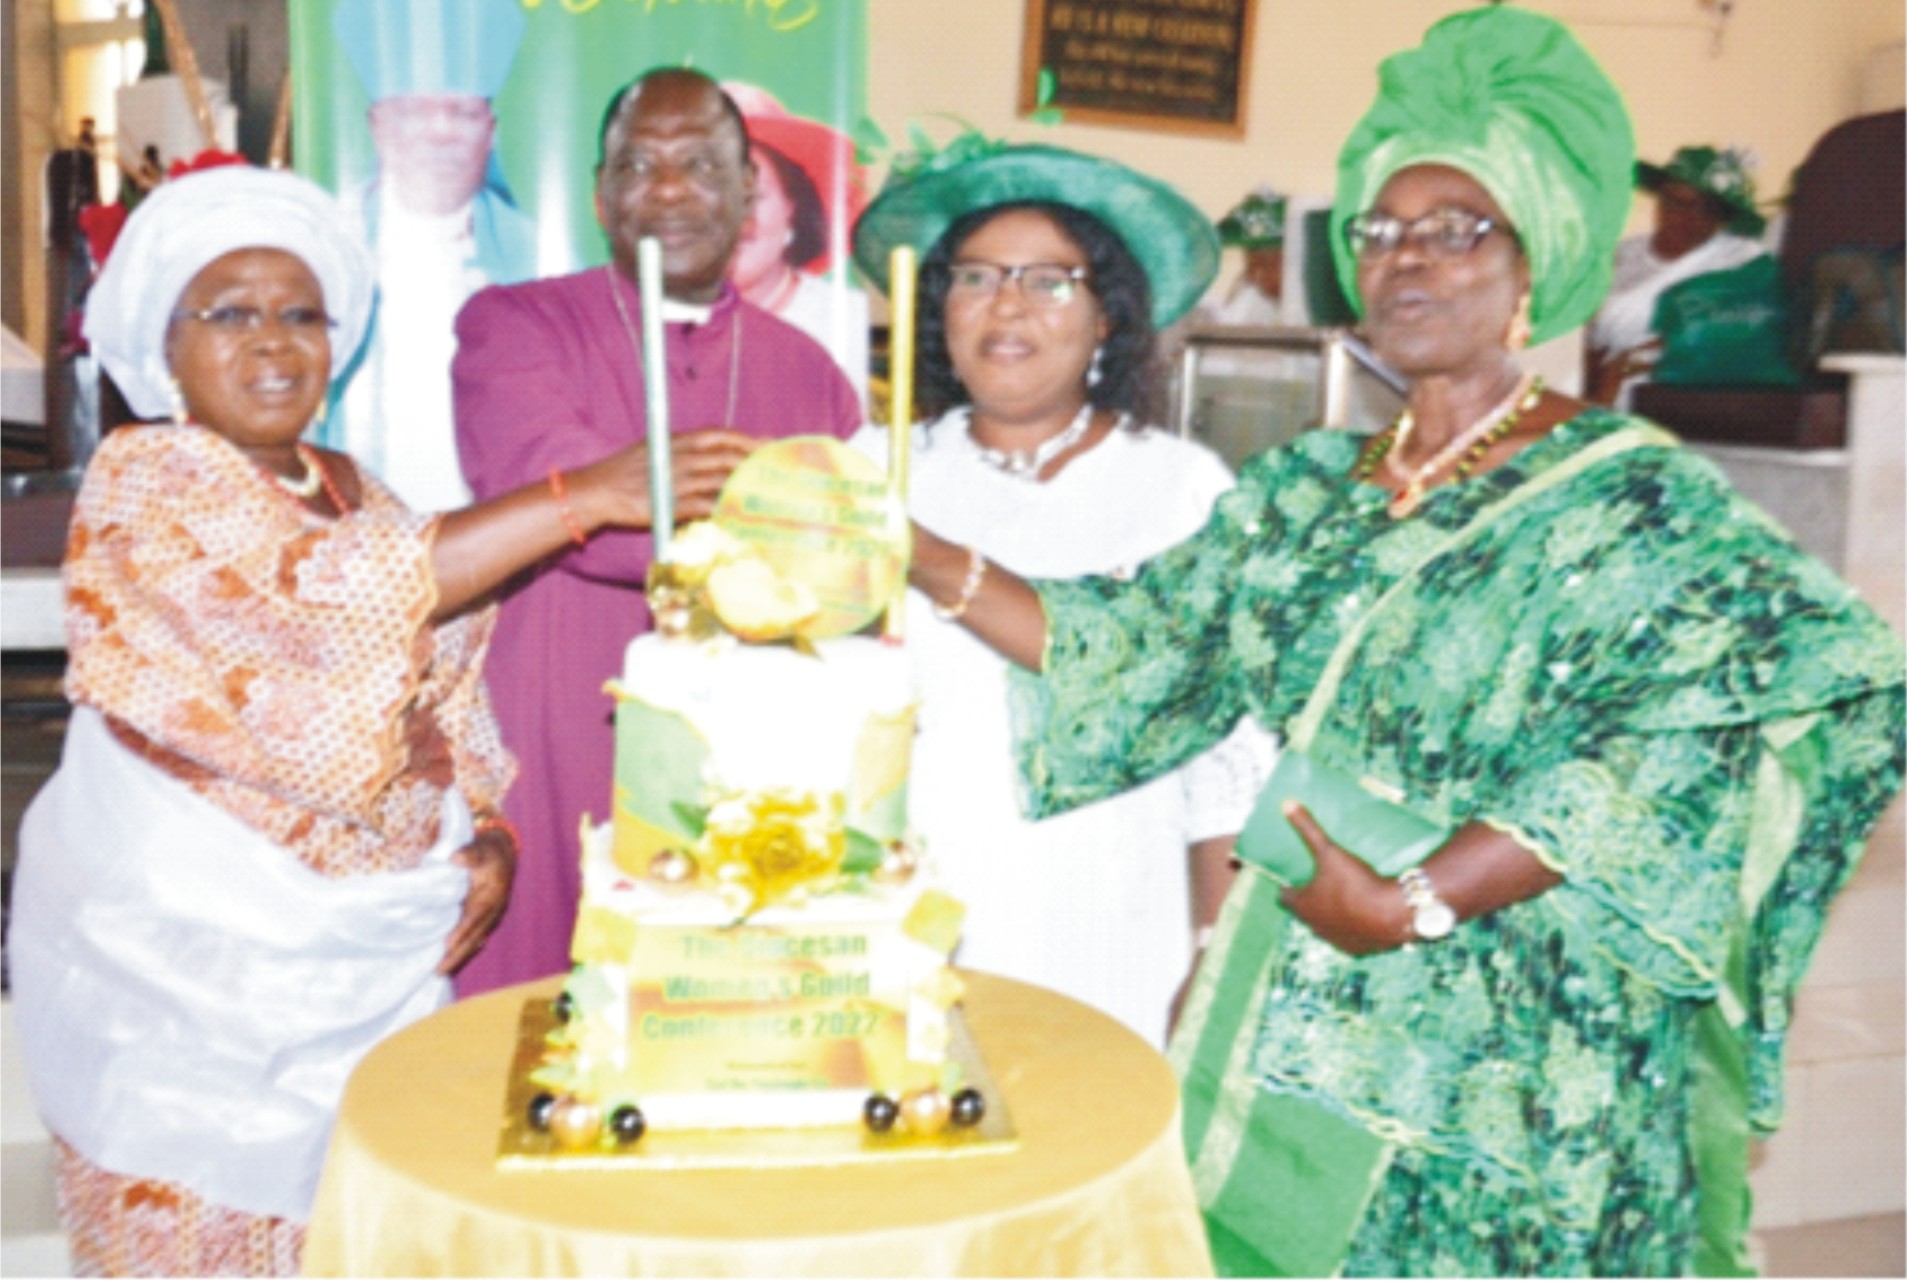 From left: Mother of the Conference, Chief (Mrs) Aribake Ojo Egunlusi, Most Revd Simeon Borokini, his wife, Christianah and Chief launcher, Chief (Mrs) Rachael Olujohungbe, cutting the 40th Conference cake at the event